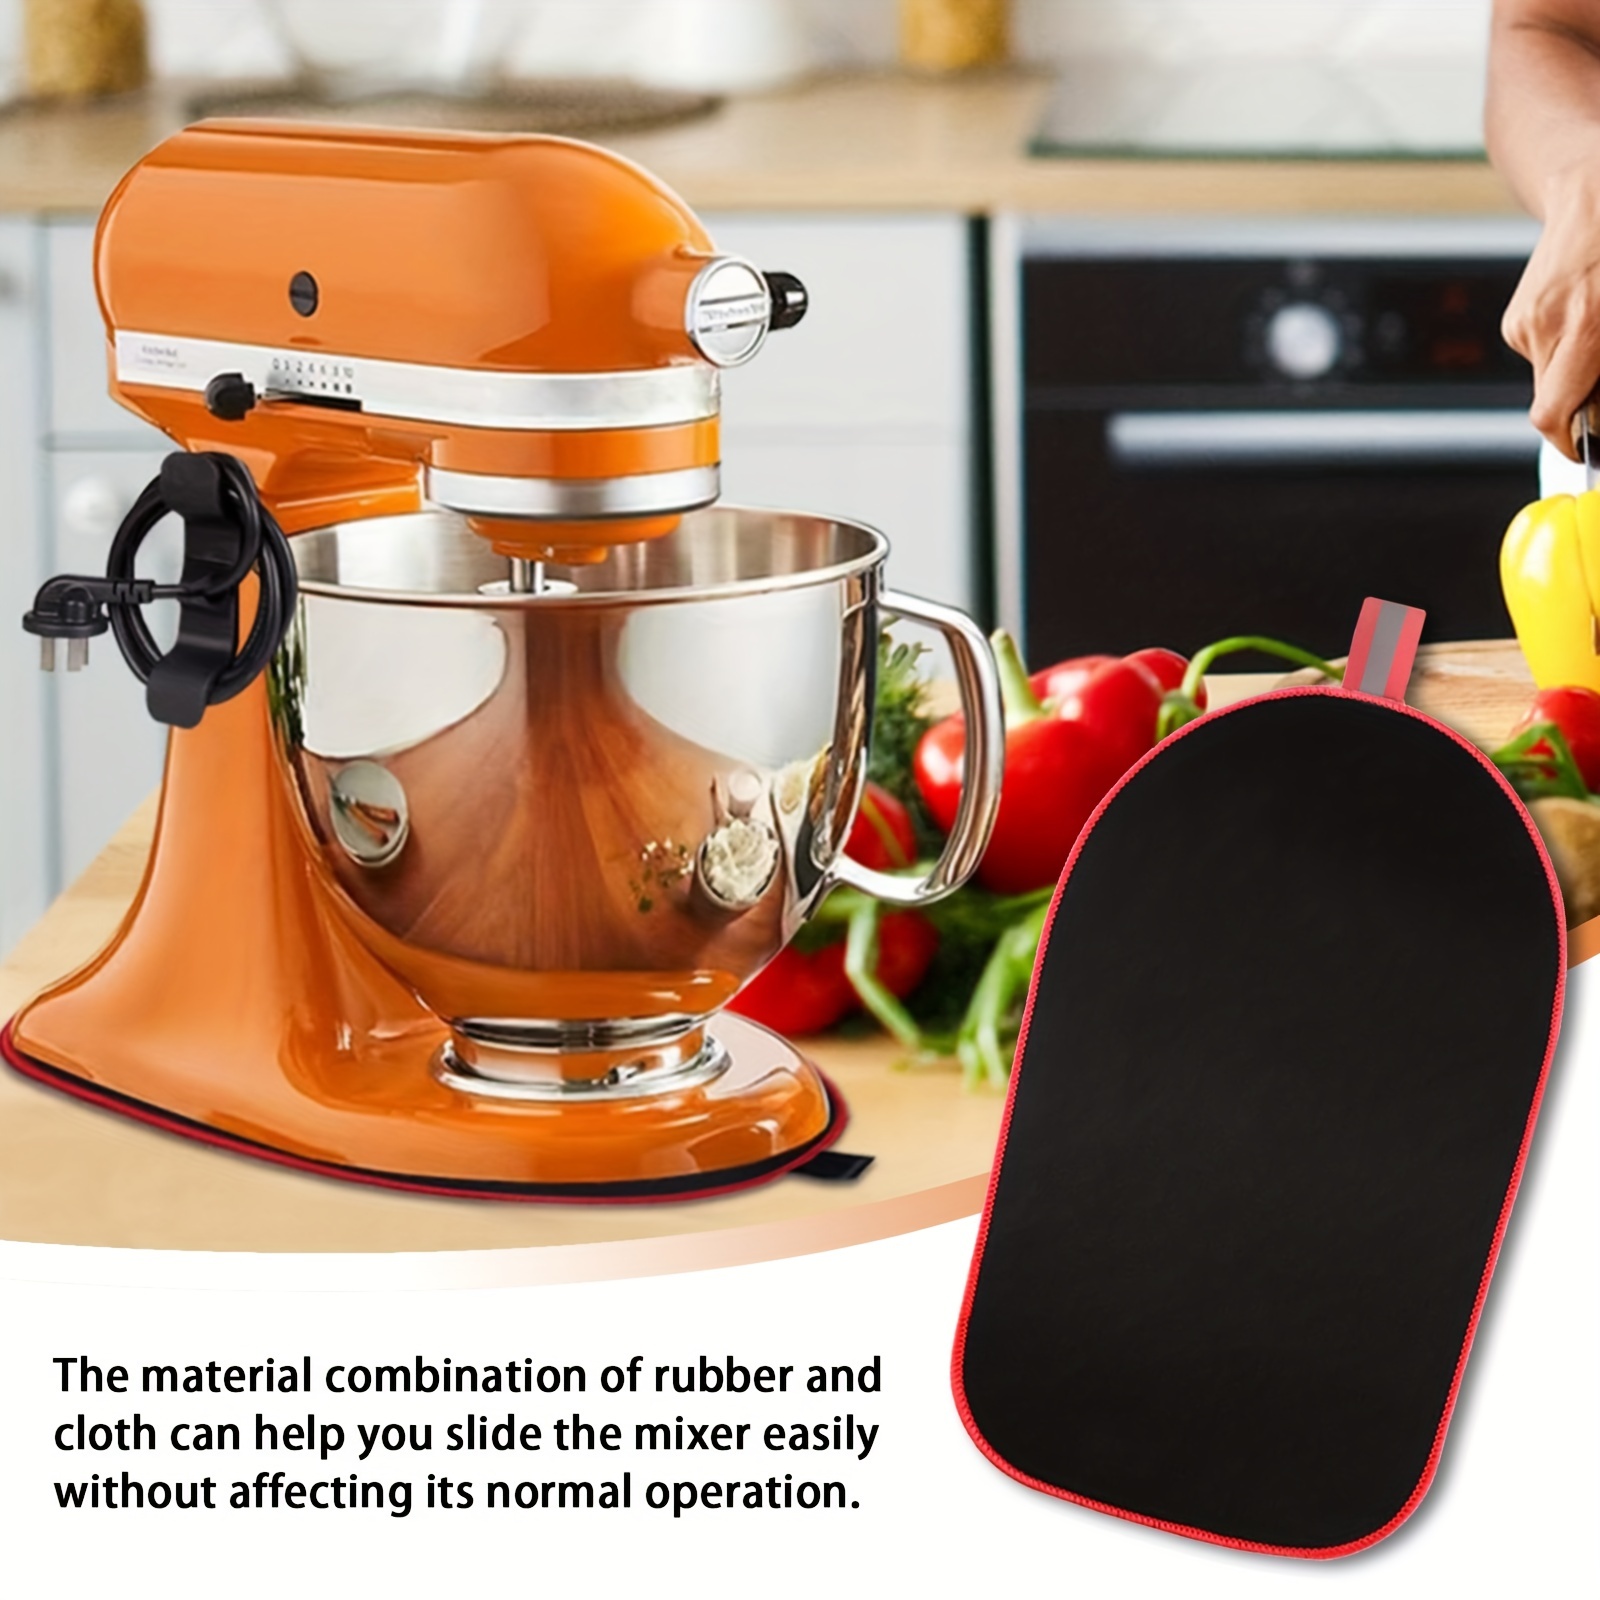 Kitchenaid Stand Mixer Sliding Mat With Cord Organizer - Protects